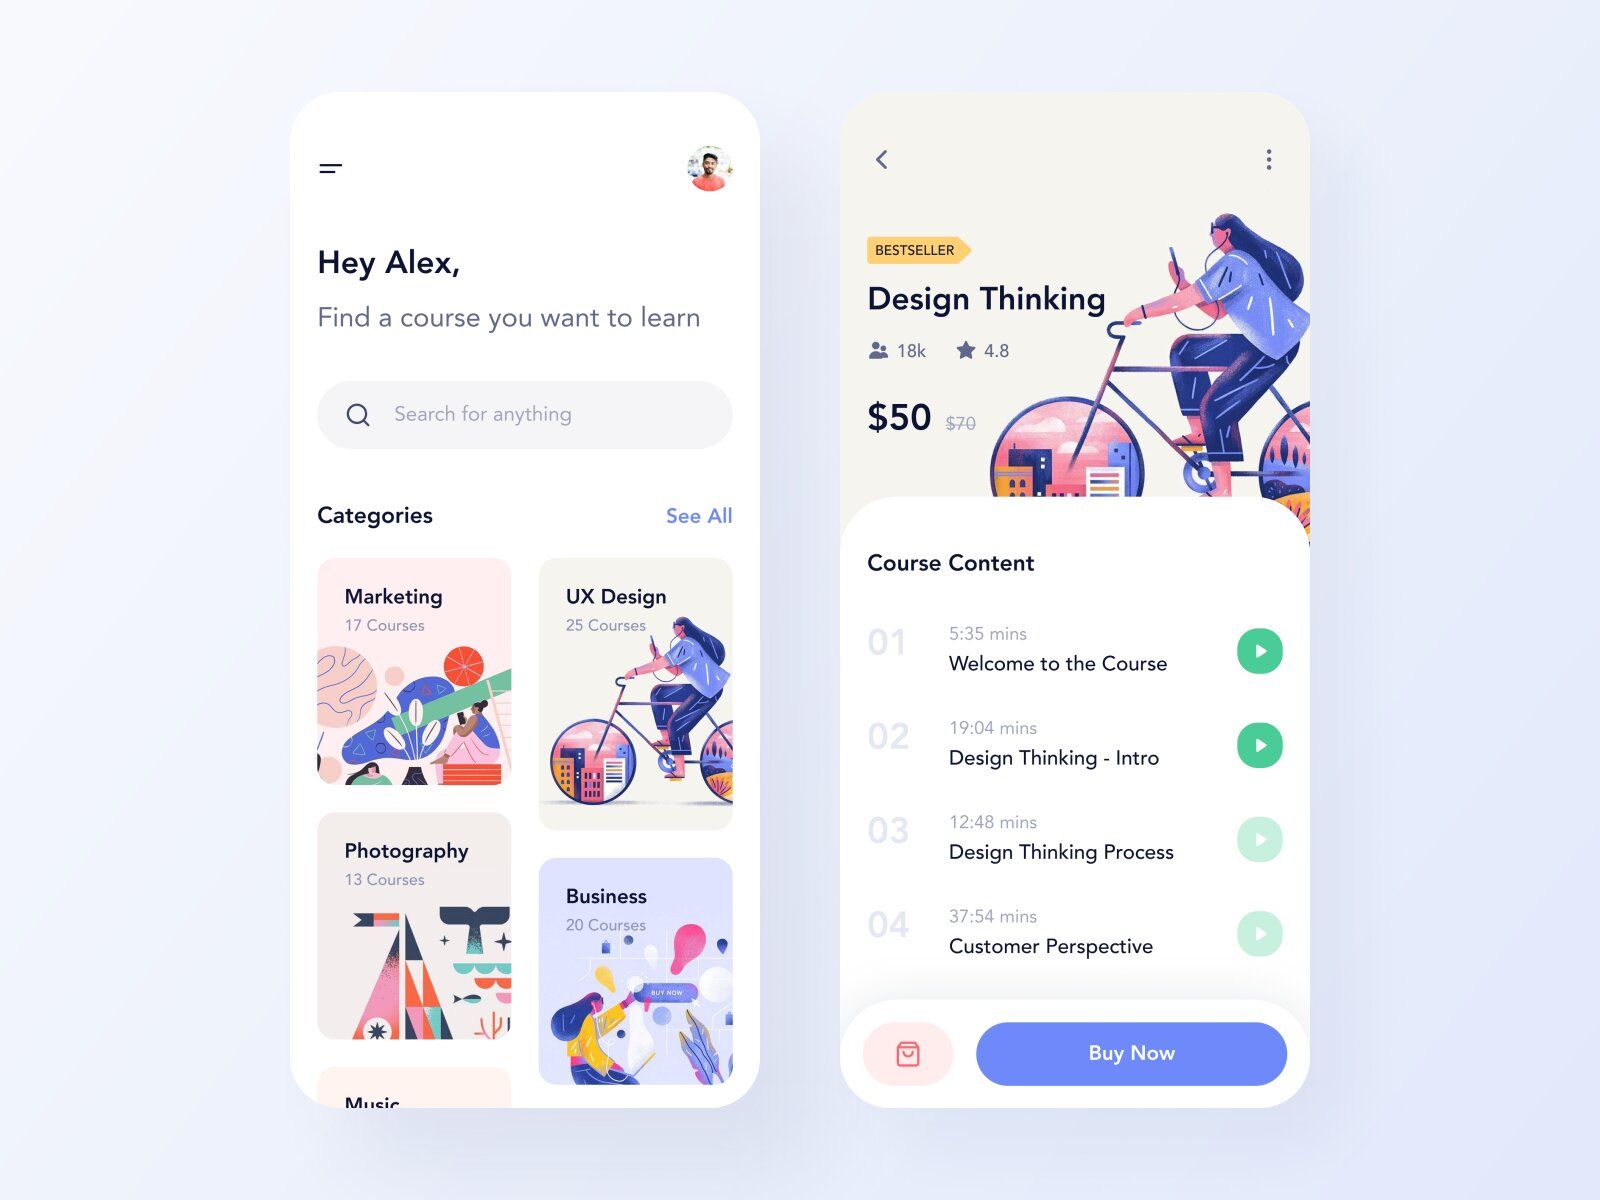 Make sure you provide students with all the necessary info about the course on your online learning website or app (*image by [simantOo](https://dribbble.com/simantoo){ rel="nofollow" .default-md}*)